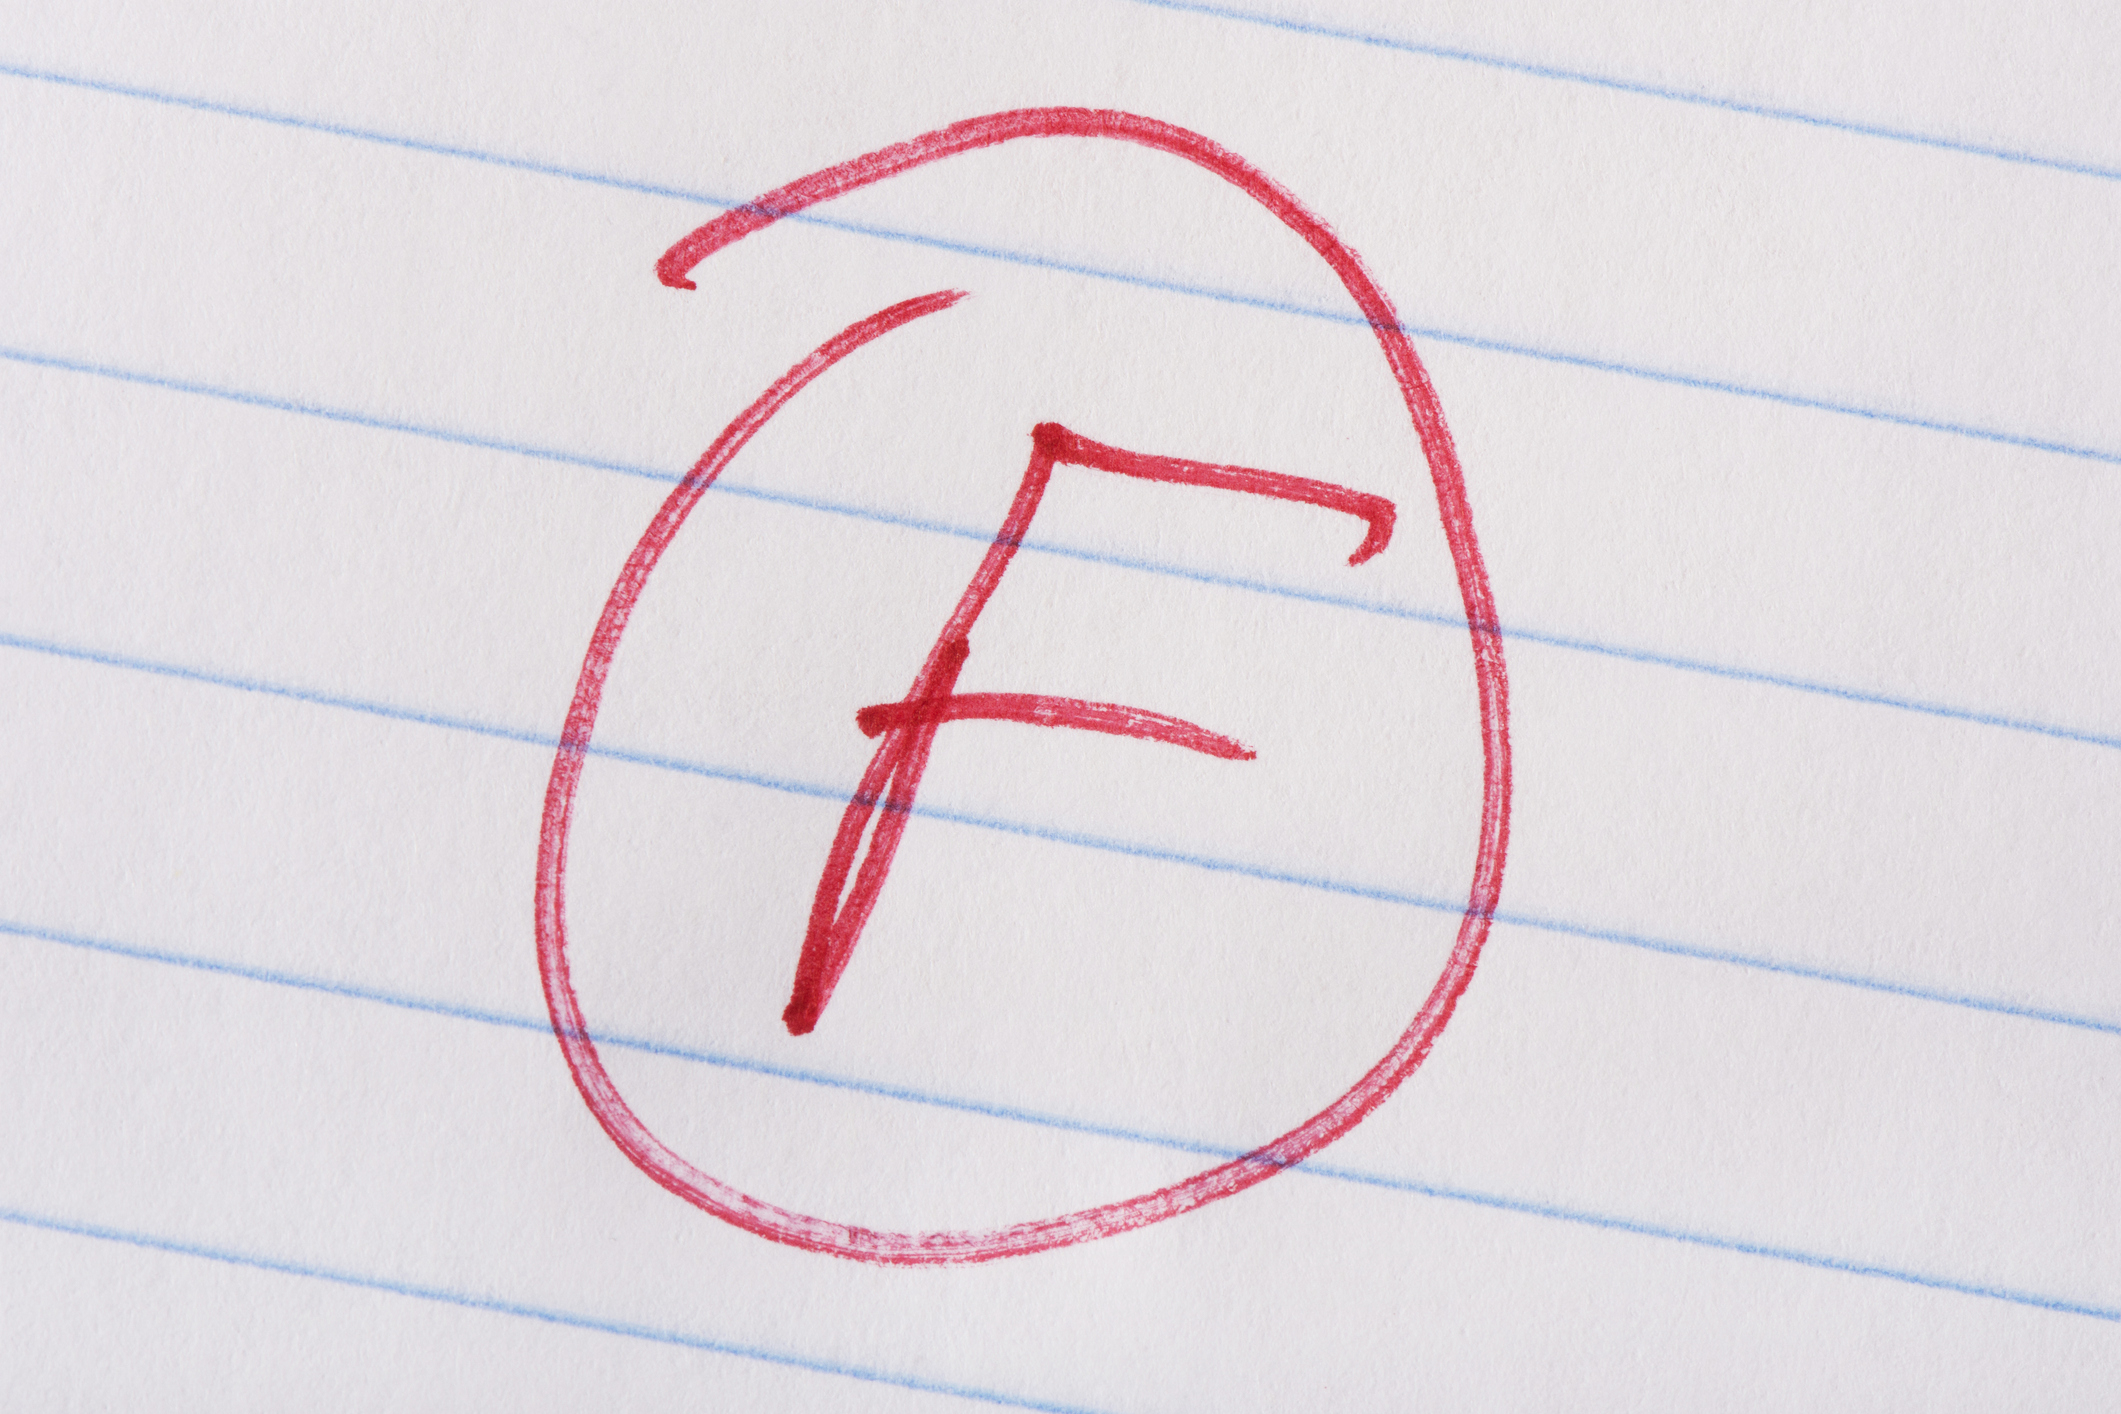 An &#x27;F&#x27; grade marked in red on lined paper